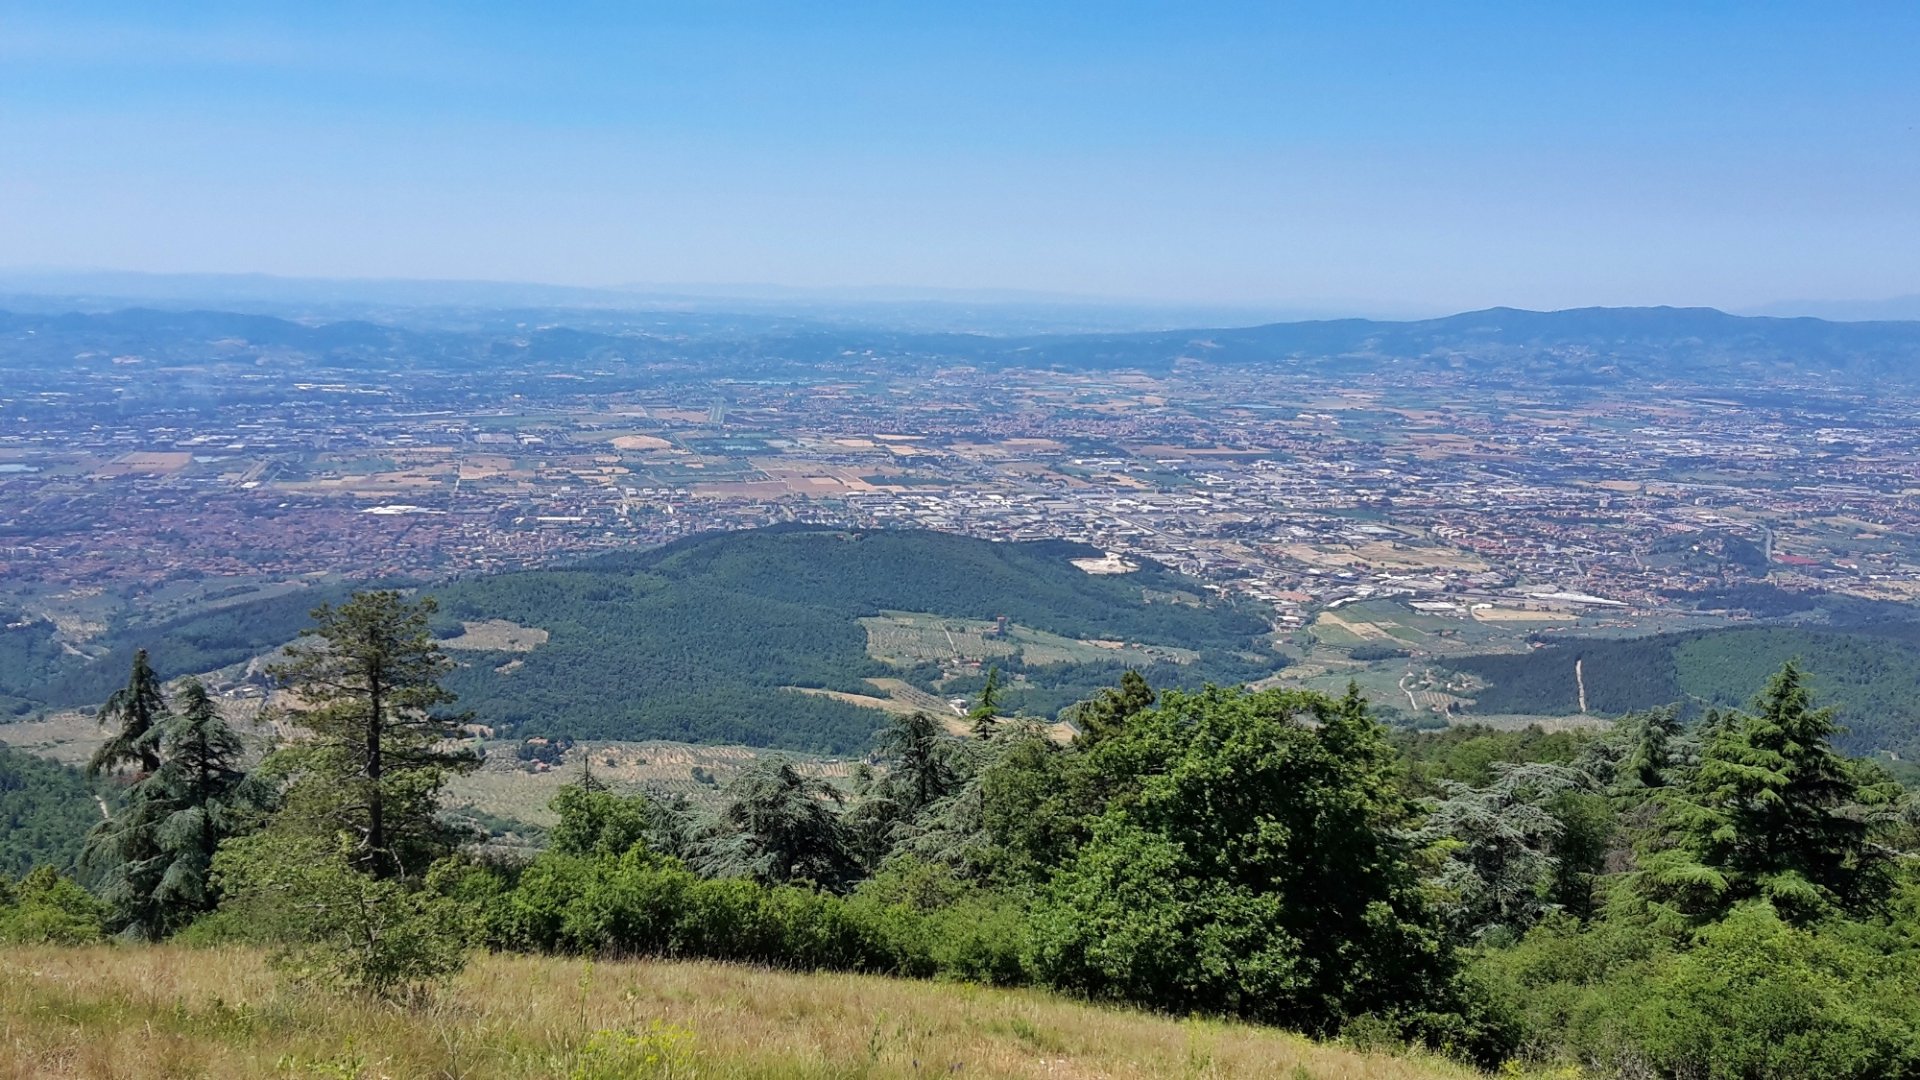 The view from Monte Morello